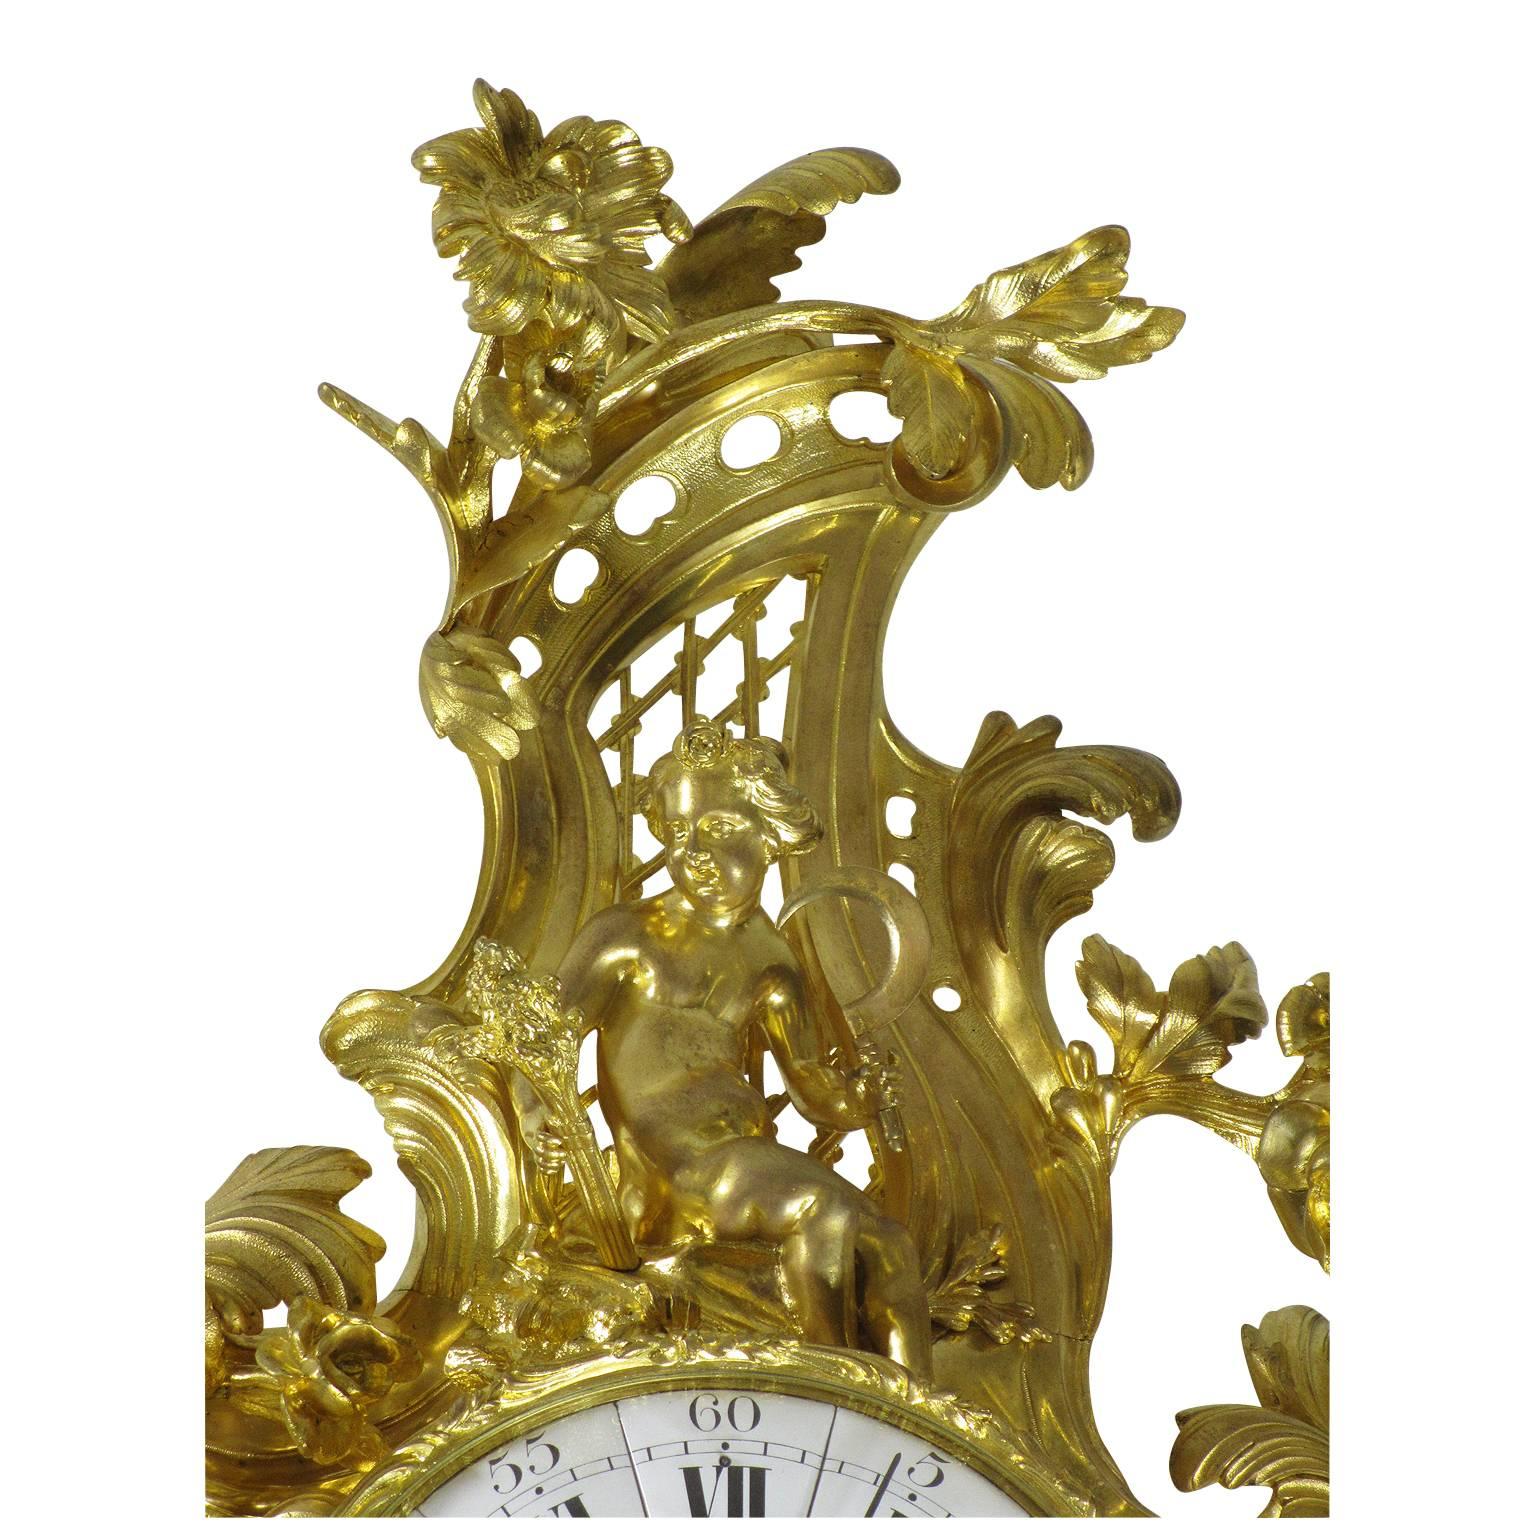 A very fine and Palatial French 19th Century Louis XV Style gilt bronze figural cartel clock by Lerolle Frères, the finely frame body with a circular face with Roman numerals, the center with a profile of King Louis XV and inscribed Lerolle